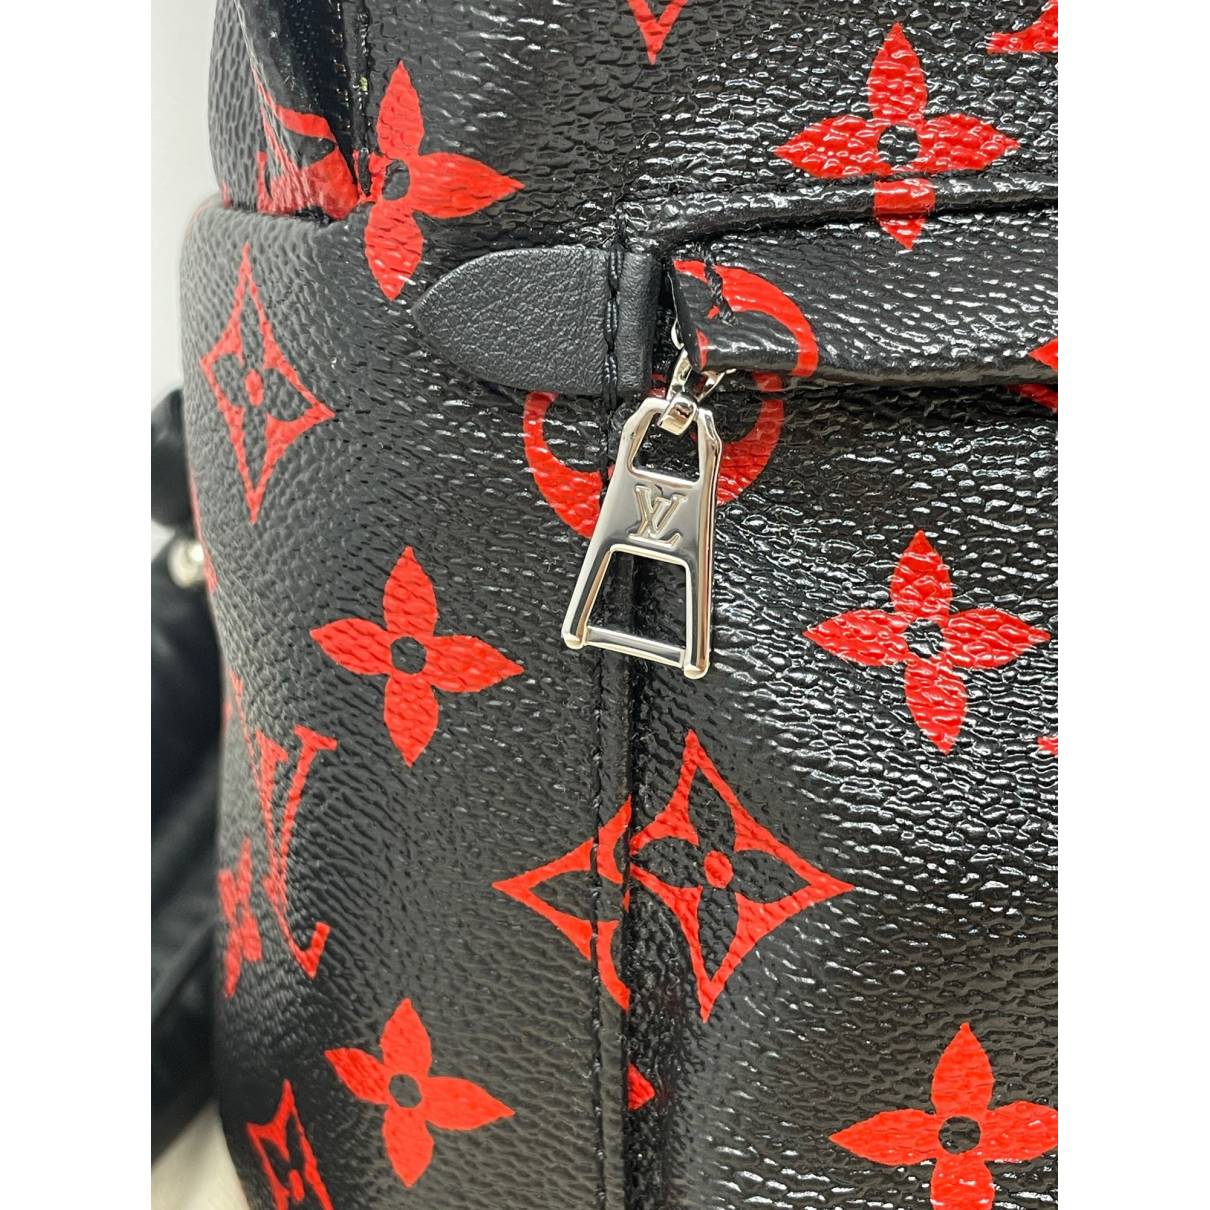 louis vuitton backpack black and red